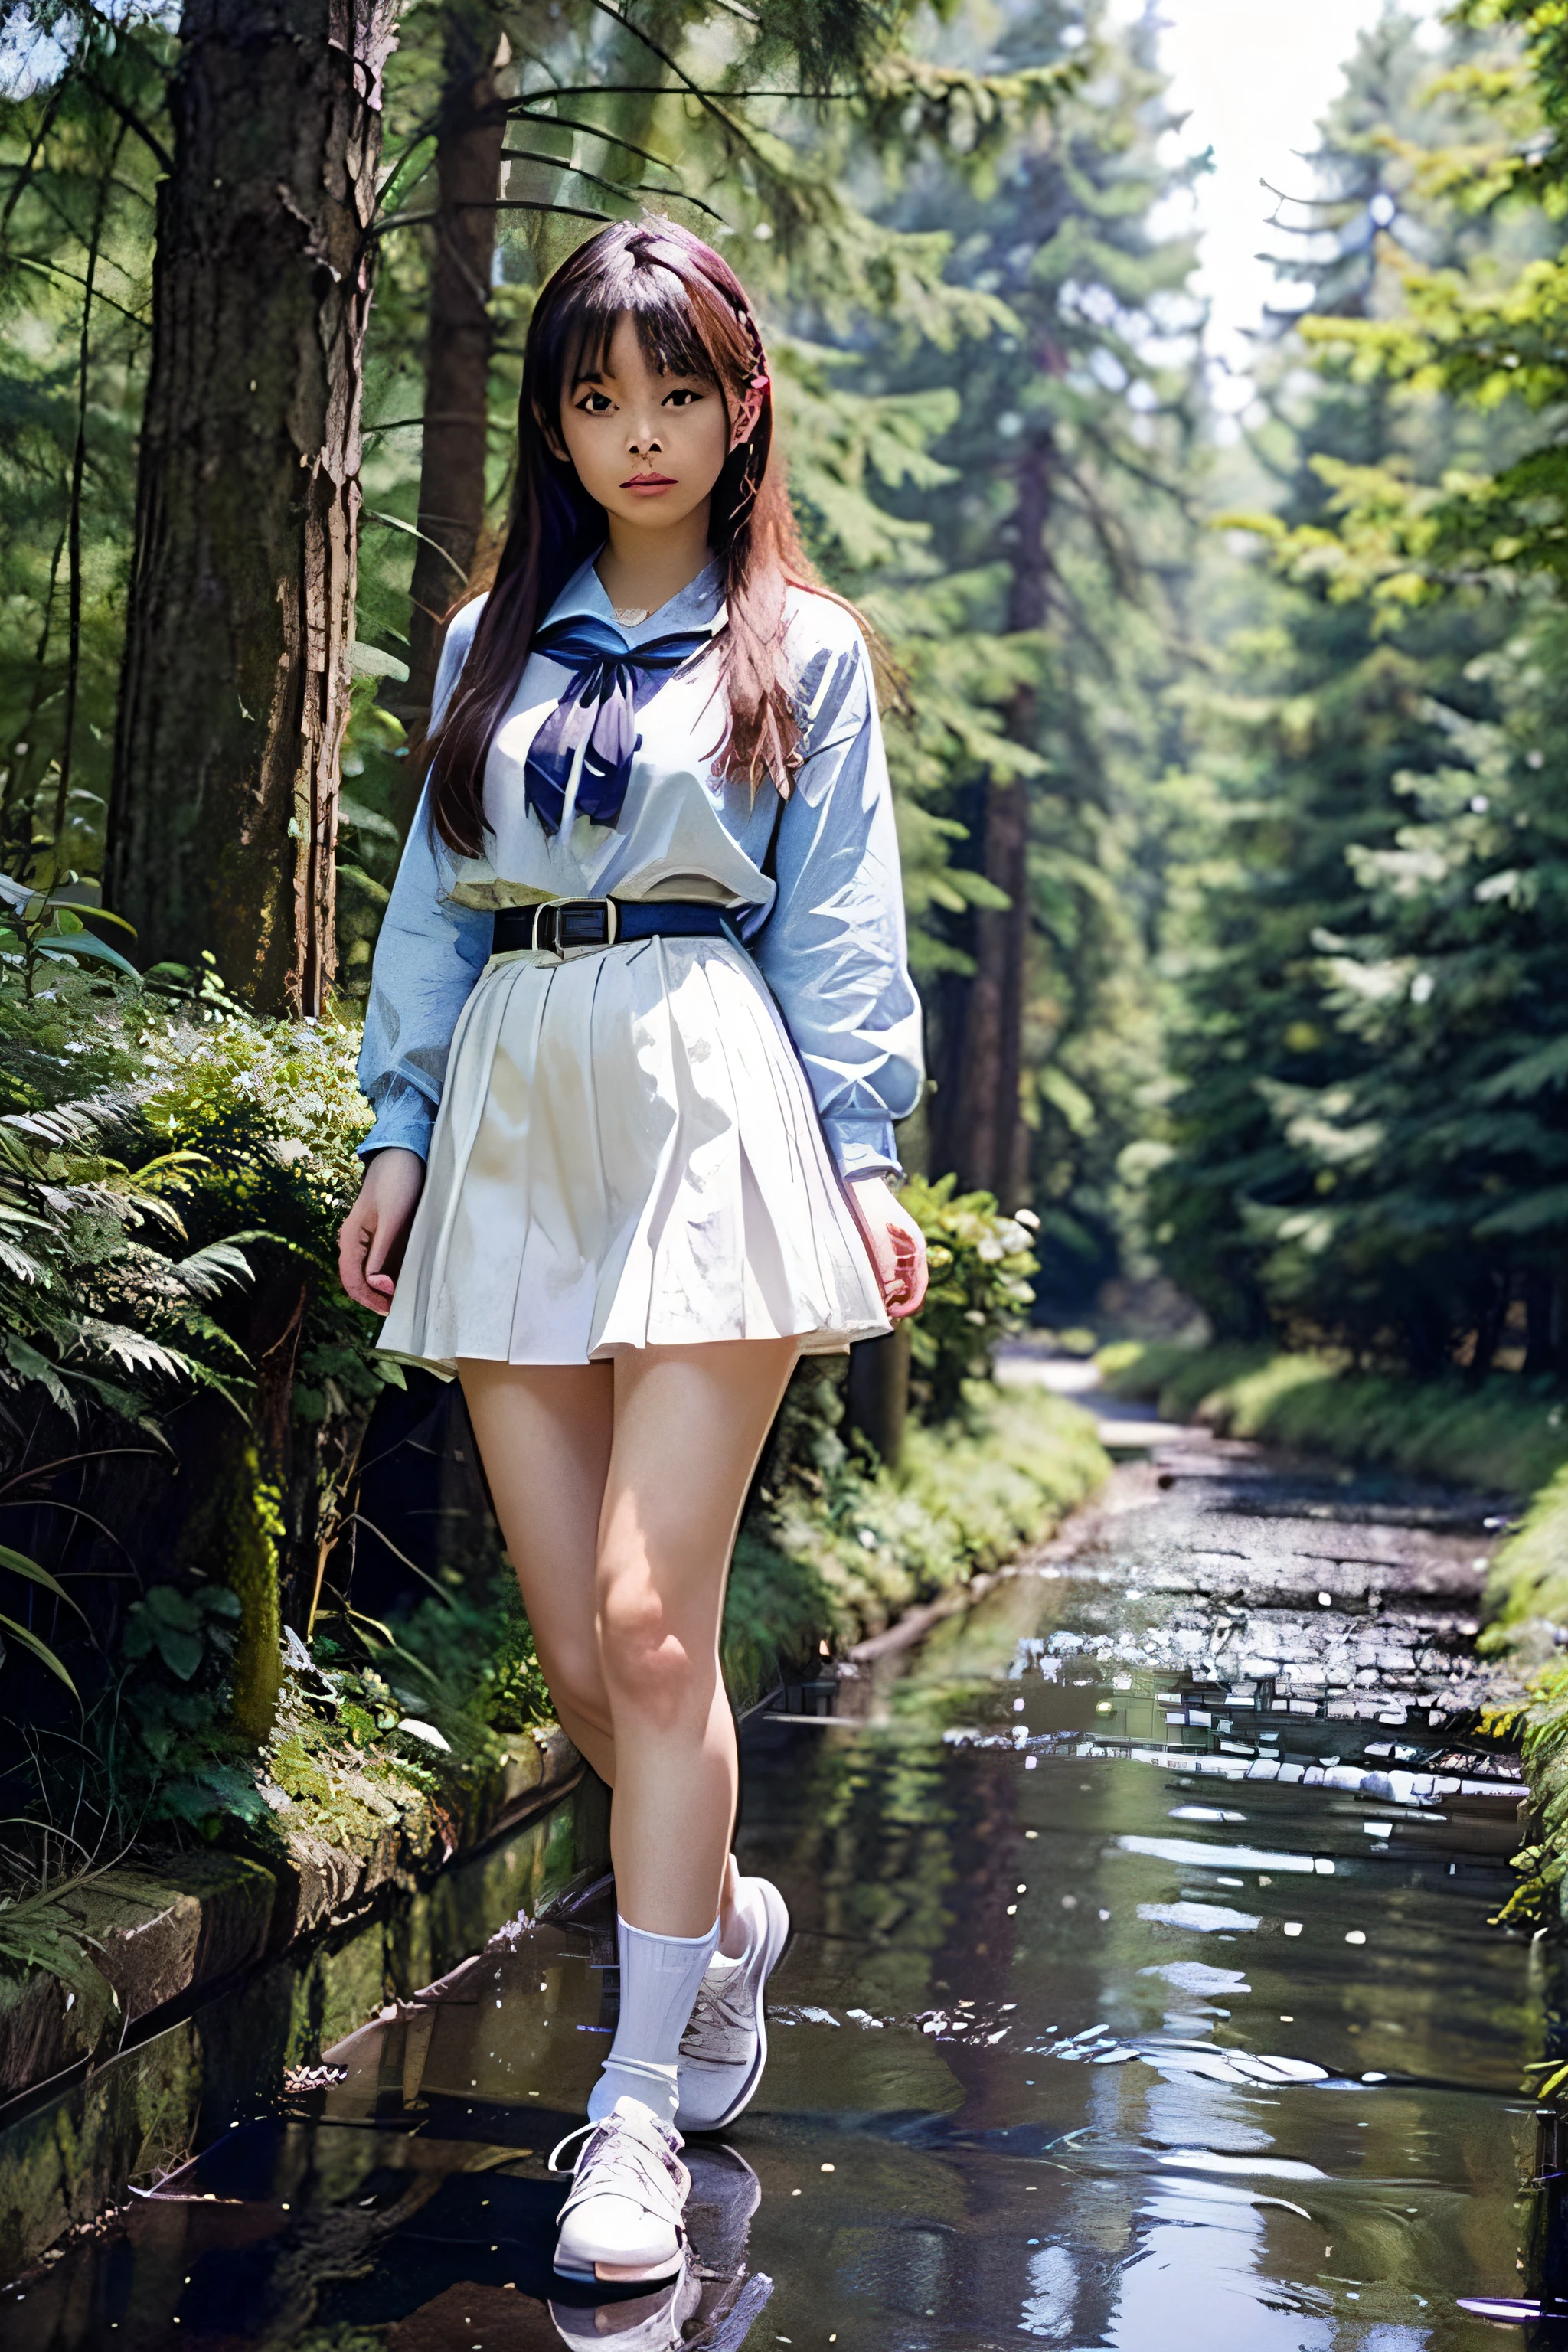 nffsw,​masterpiece、high-level image quality、The ultra -The high-definition、8k wallpaper、((Extremely beautiful face、kawaii faces))、Bright brown eyes、((Double beautiful eyes))、no-makeup、Well-formed face,full body Esbian、a sailor suit,Blue Ribbon、White skirt、One Beautiful Girl, hi-school girl、15yo student、Hairstyle with bangs、great outdoors、Blue swamp in the coniferous forest belt、Beautiful girl walking in the water and coming here、Embarrassment、confusion、Ephemeral、dark sky、side lights、Noise Reduction、Pale and soft light、diffuse glow、Hair that flutters in the wind、A skirt that flutters in the wind,pantiy、White panty、Soaring skirt、pantiy